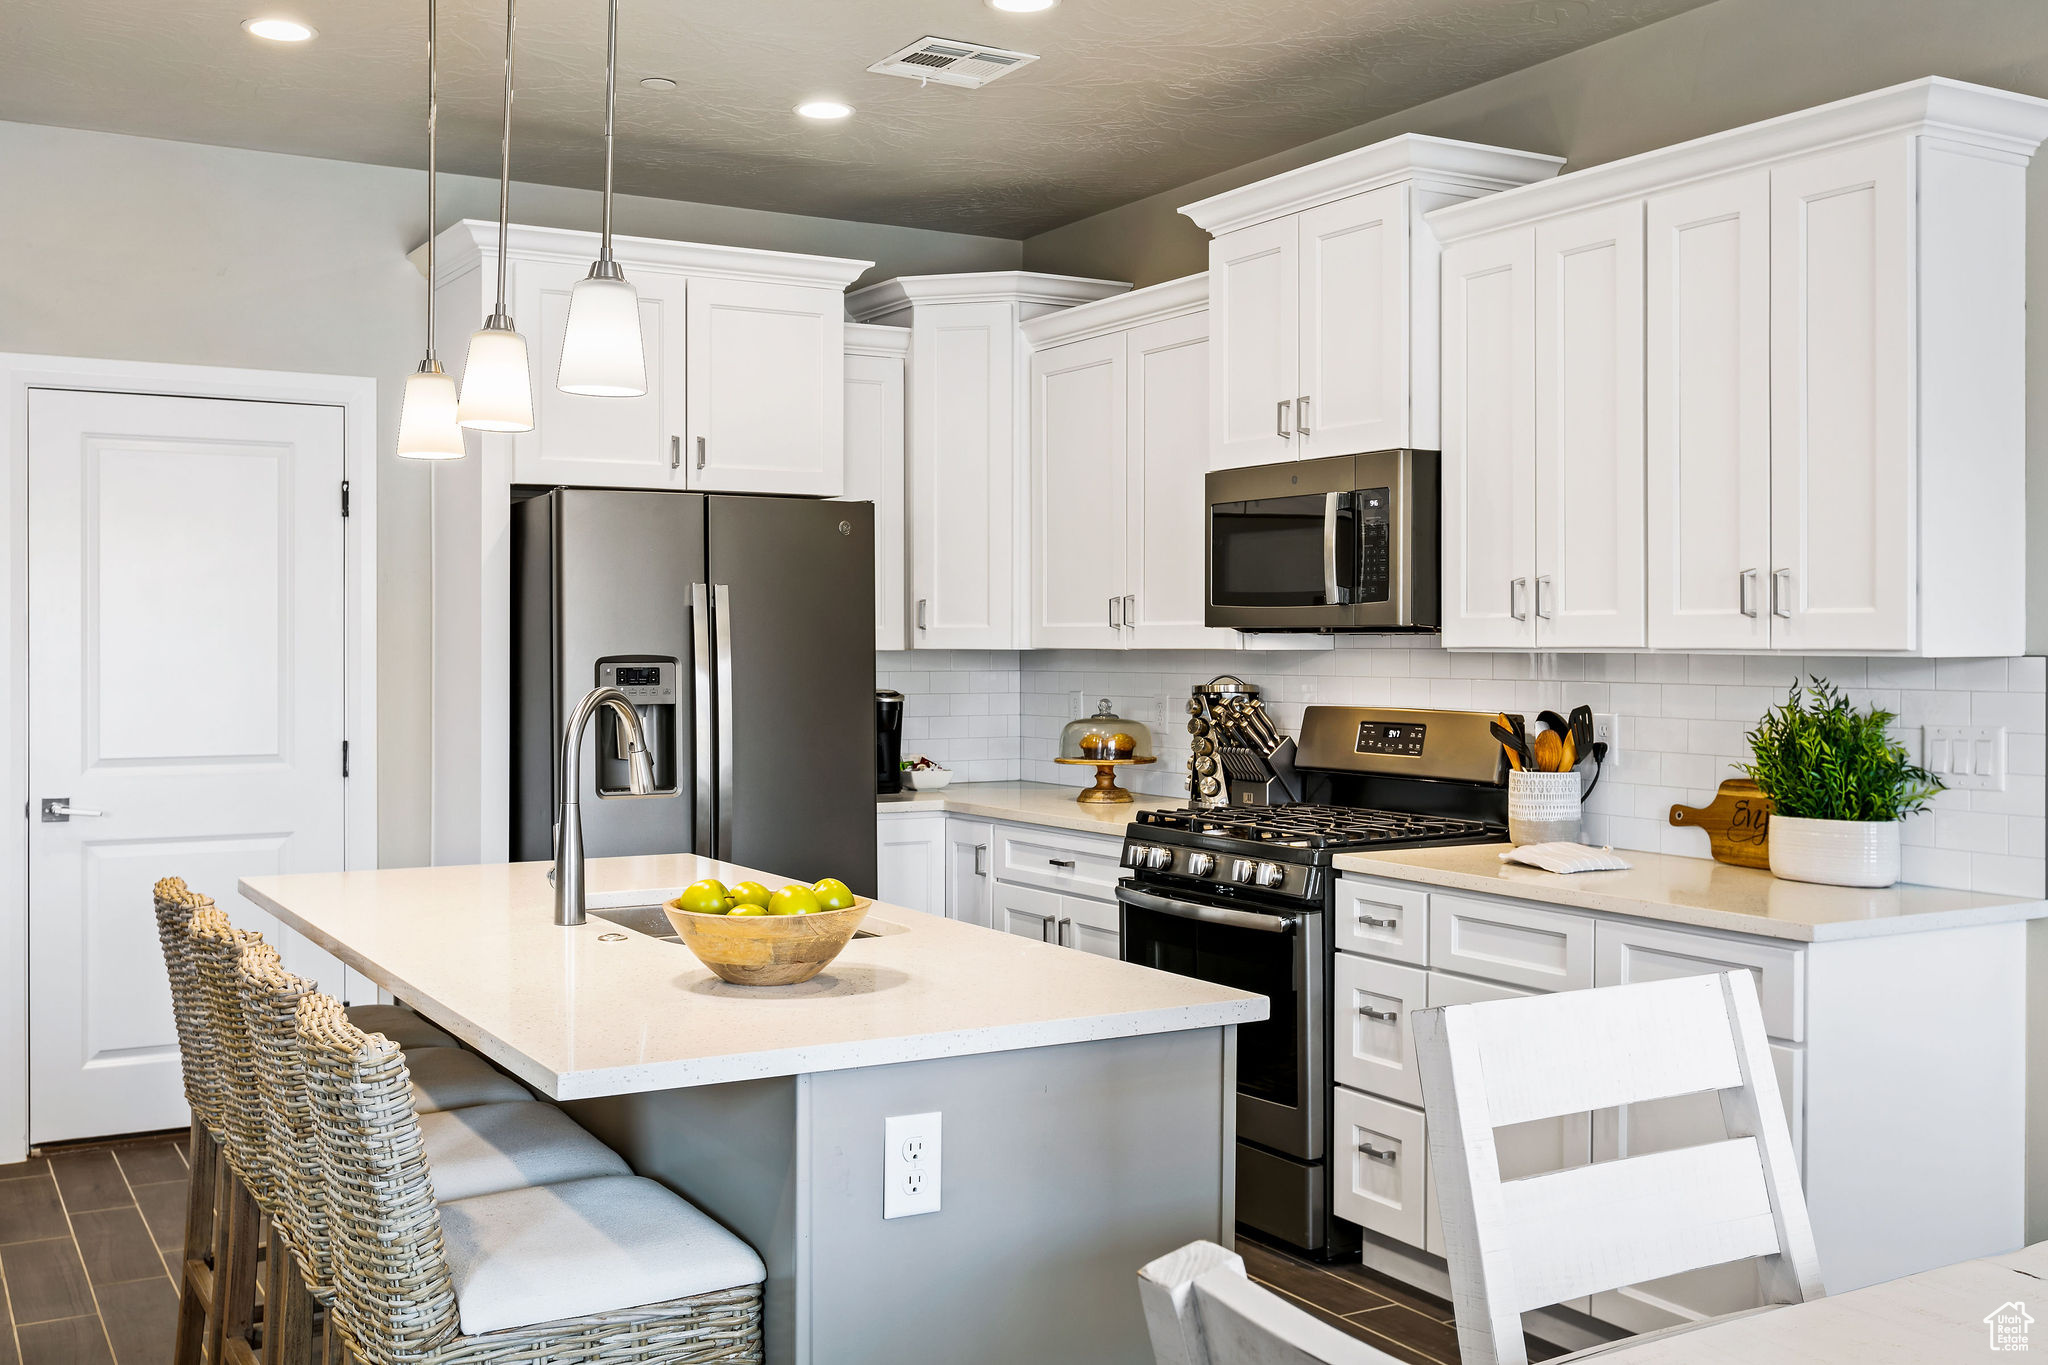 Kitchen featuring hanging light fixtures, stainless steel appliances, a center island with sink, tasteful backsplash, and white cabinets